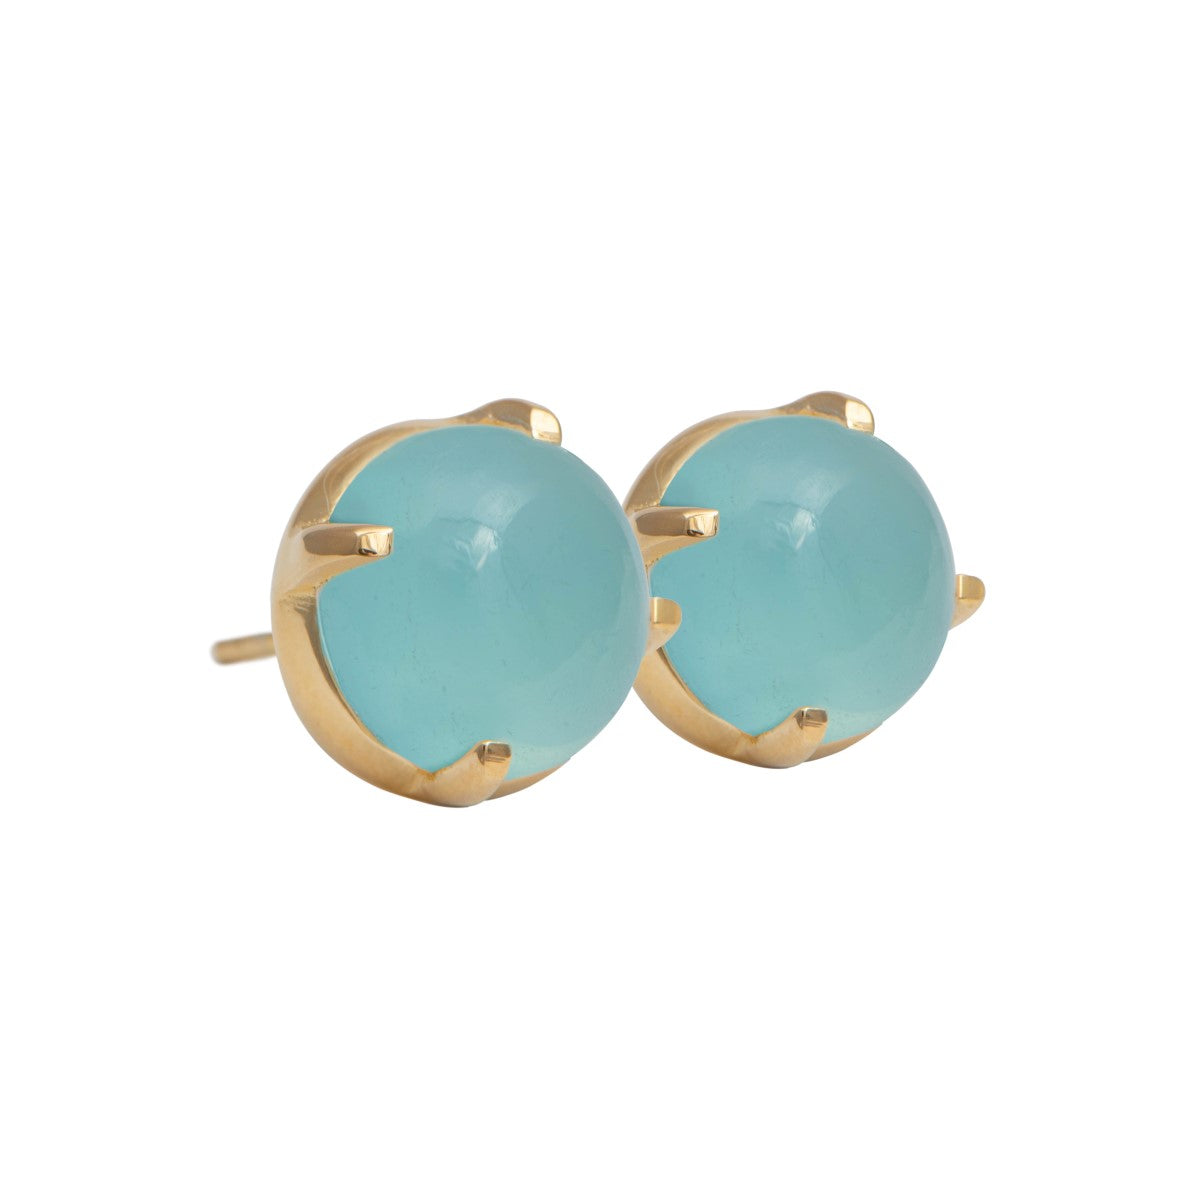 Round Cabochon Aqua Chalcedony Stud Earrings in Gold Plated Sterling Silver